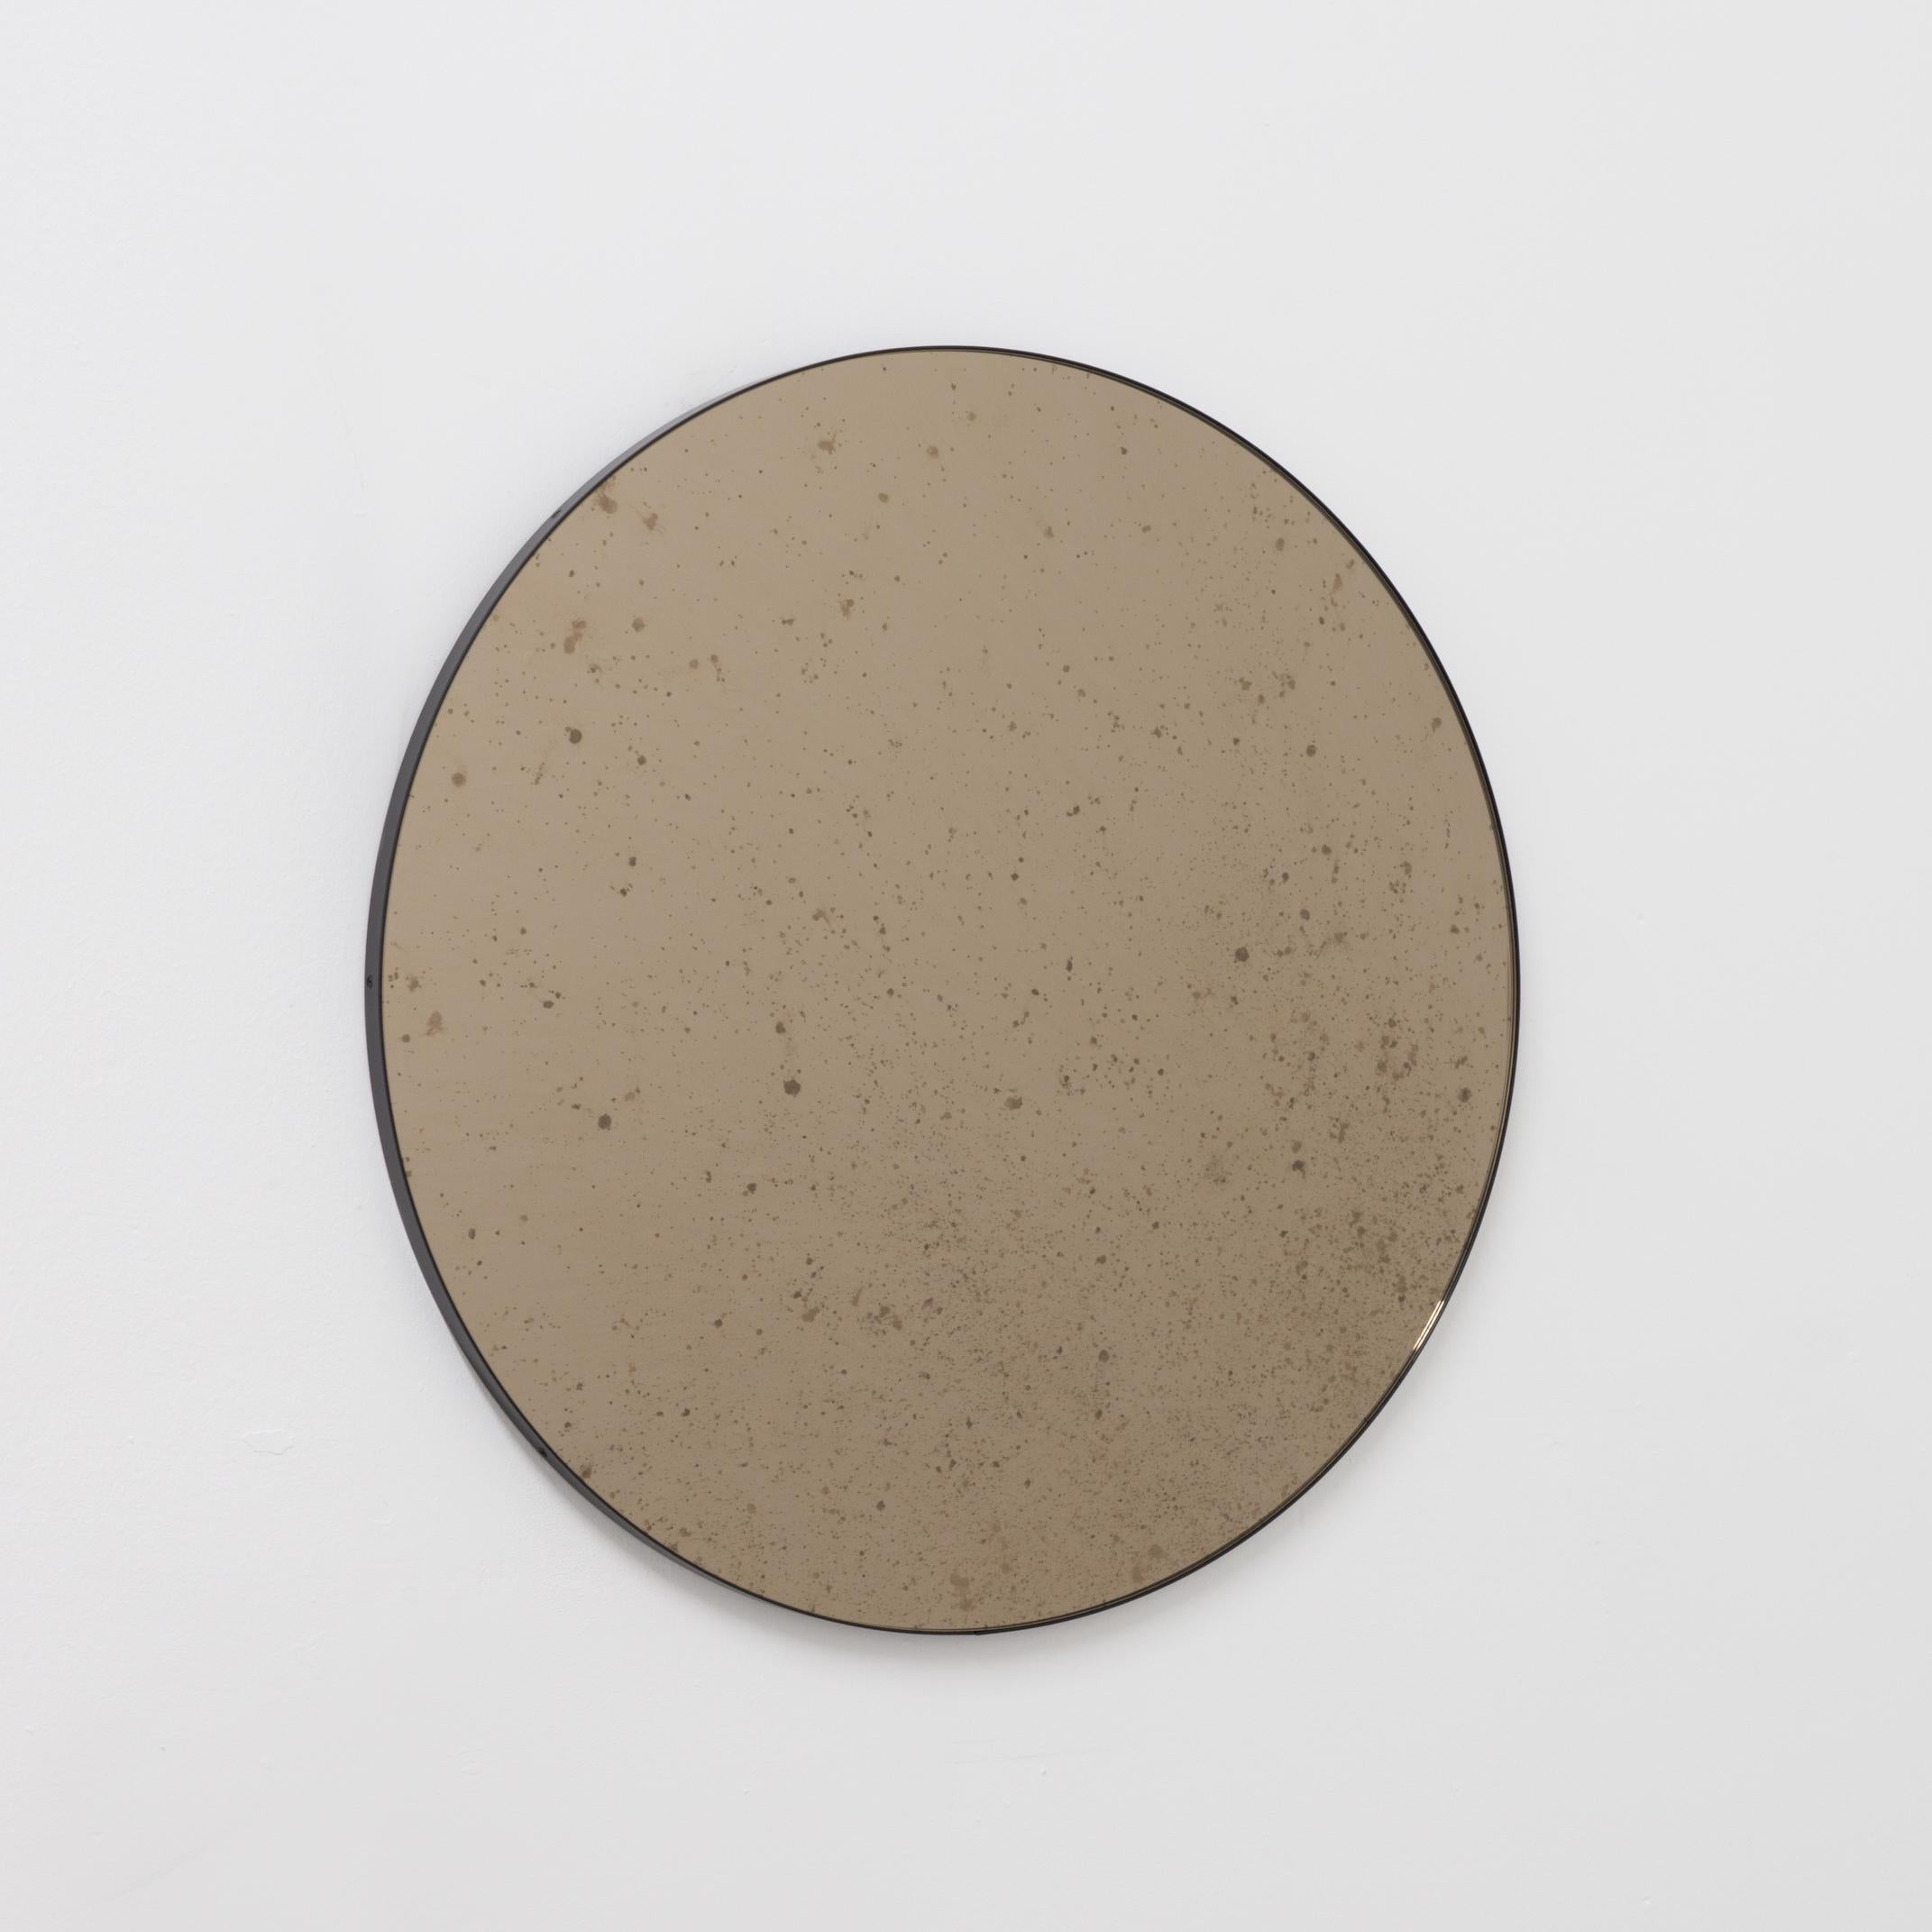 Delightful bronze tinted antiqued round mirror with an elegant black frame. Designed and handcrafted in London, UK.

Fitted with a brass hook or an aluminium z-bar depending on the size of the mirror. Also available on demand with a split batten